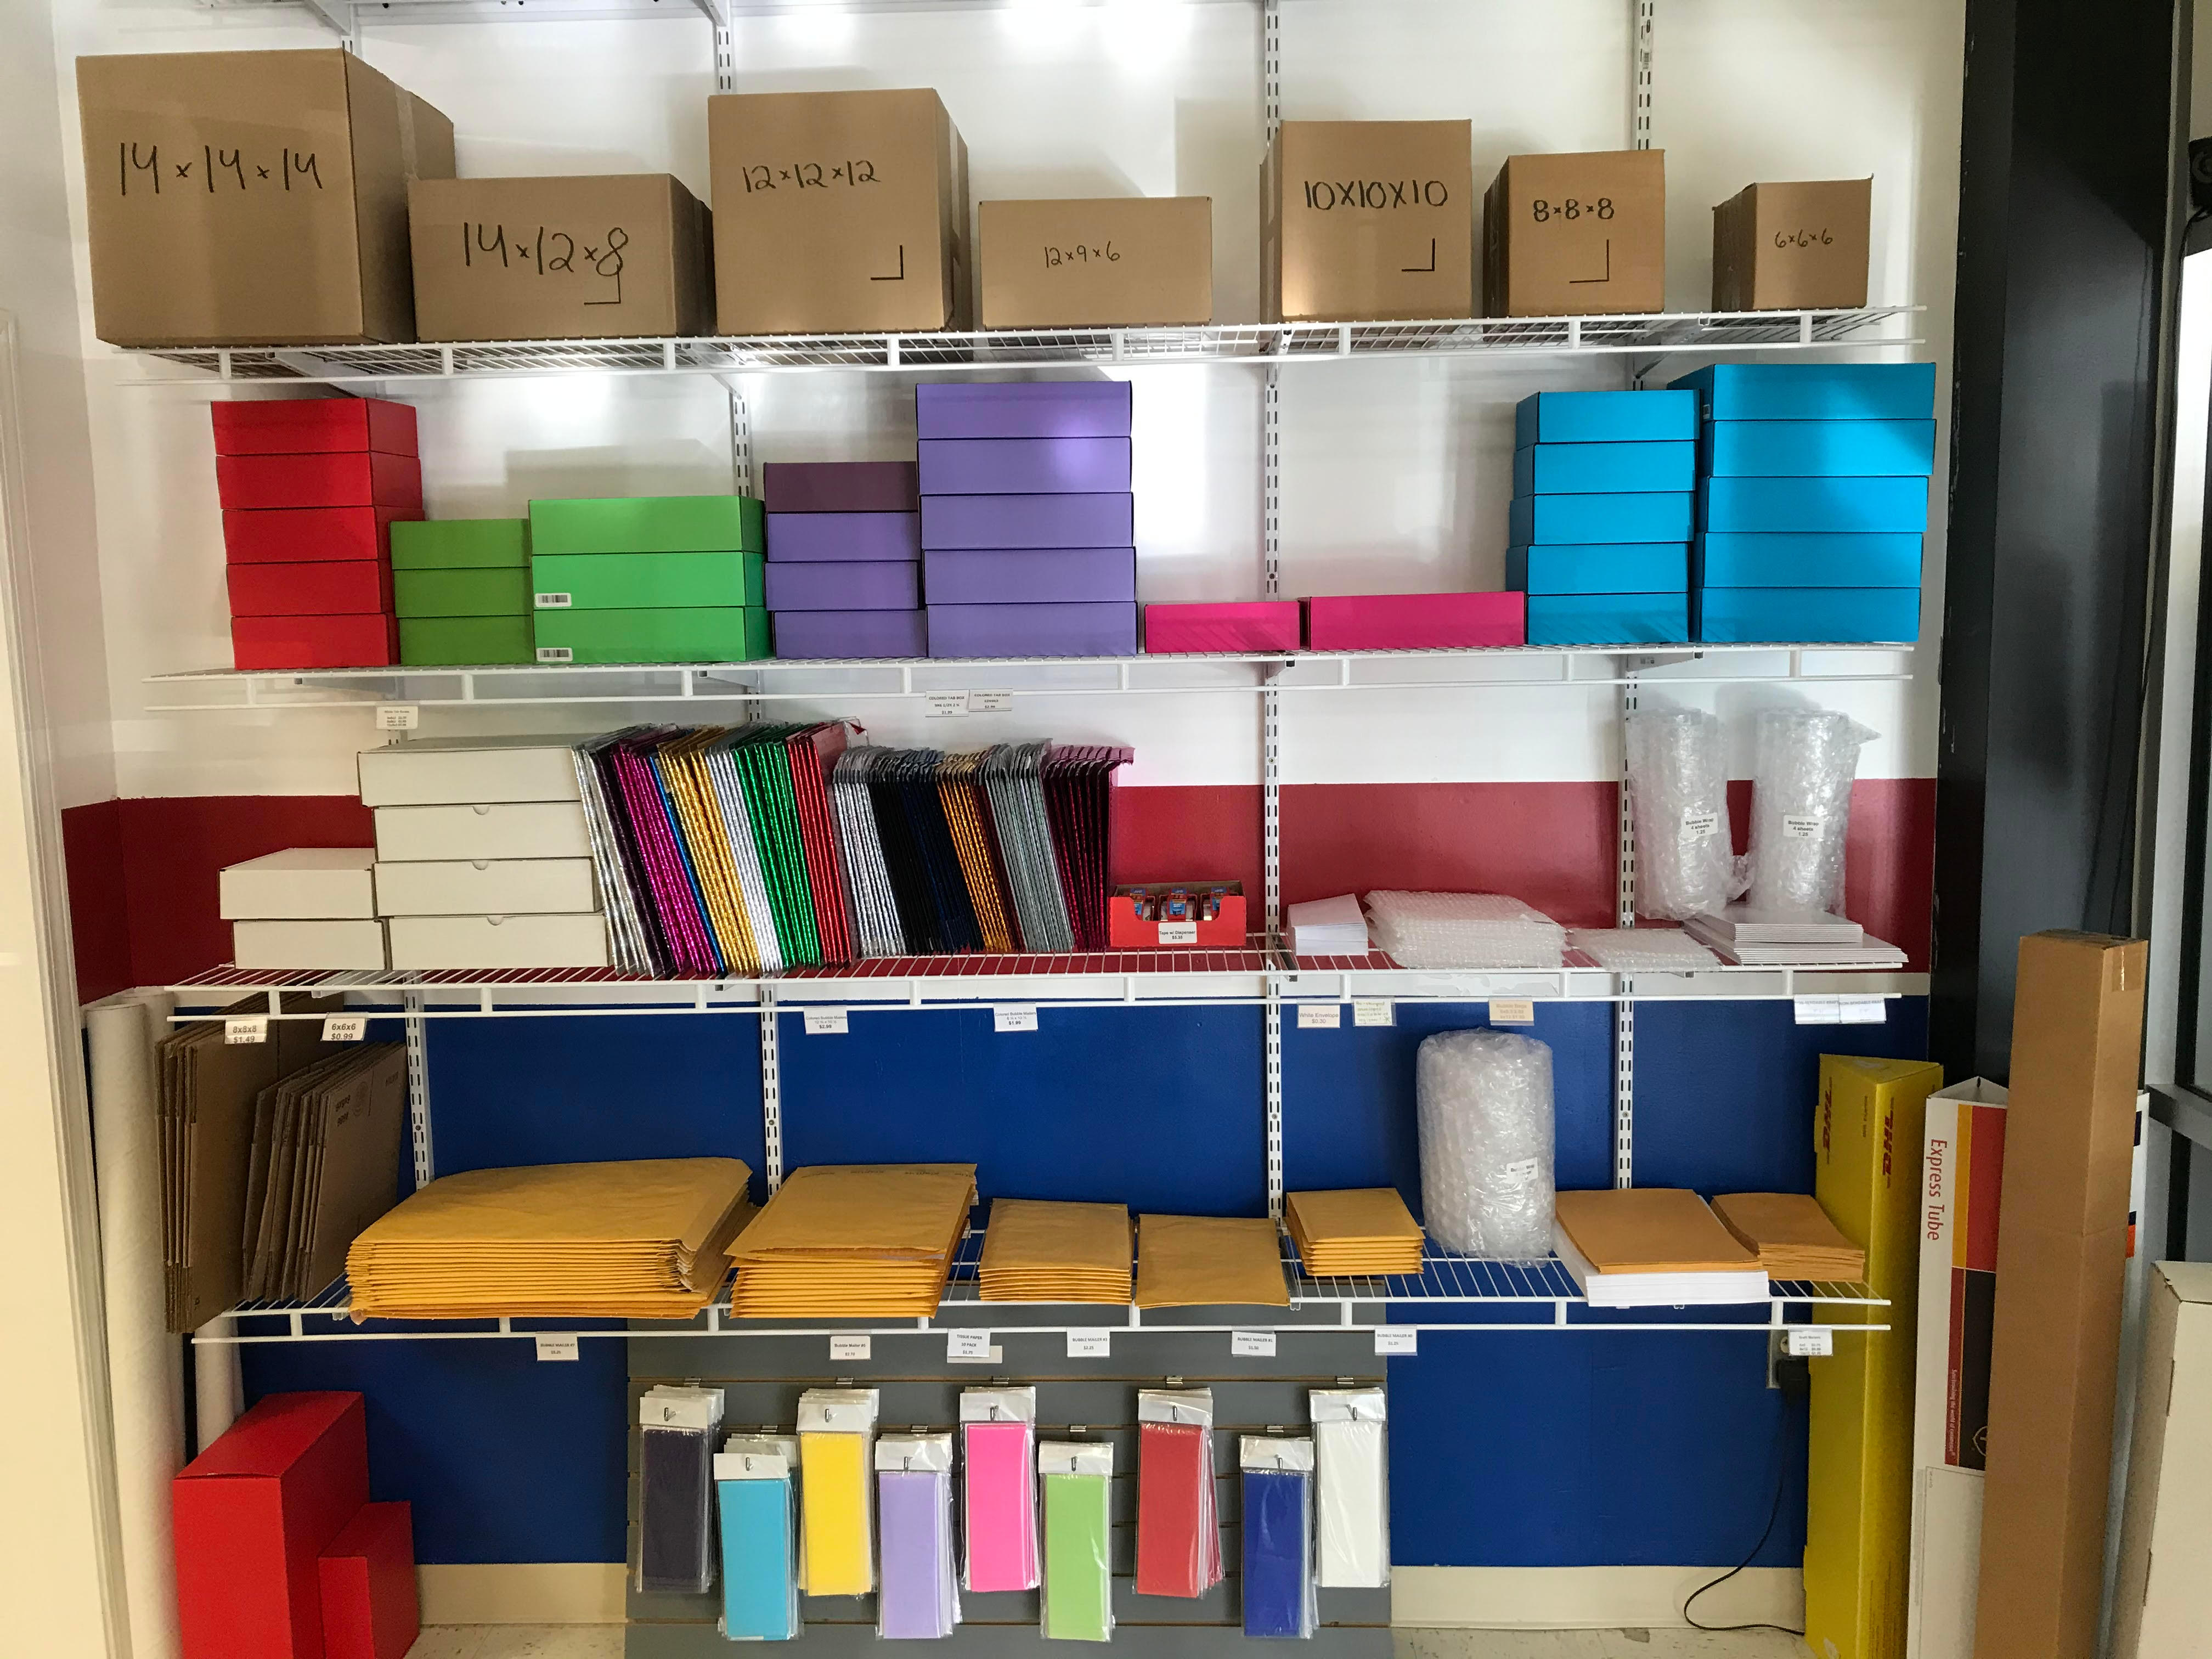 We are OPEN! Ever thought that plain white envelope or brown box was, well, boring? That’s why we have boxes and envelopes and boxes and bold and bright colors! Make a statement with your next shipment. Stop by and the team at @GPLejeune can assist you in getting IT to wherever IT needs to go. We ship with ALL major US carriers. Stop by today and say hi!